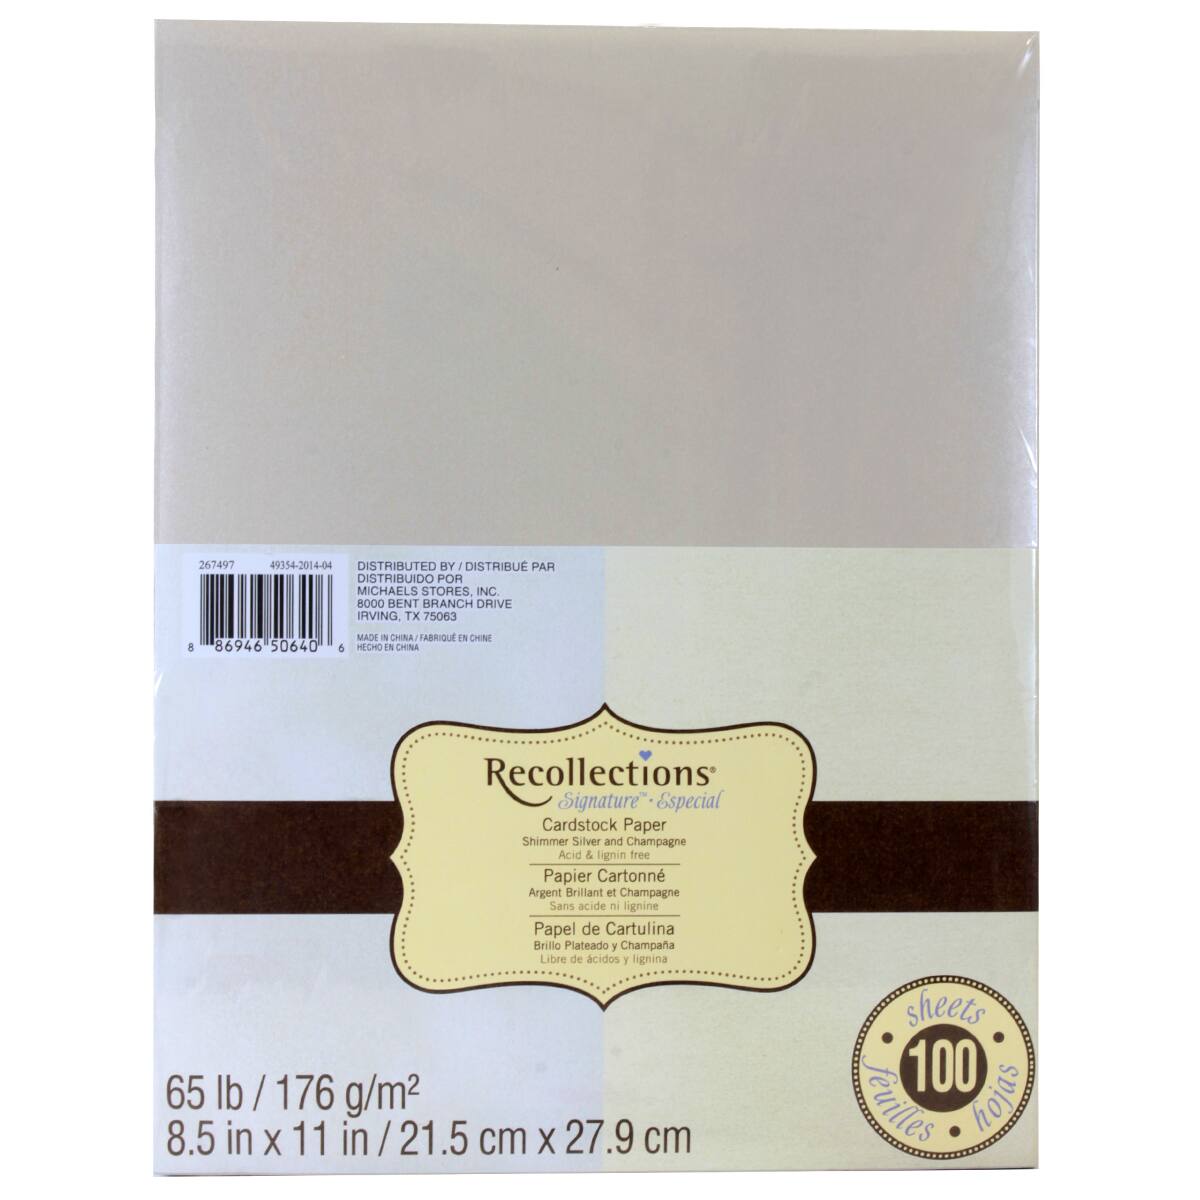 Blue Hues Shimmer 8.5 x 11 Cardstock Paper by Recollections™, 100 Sheets, Michaels